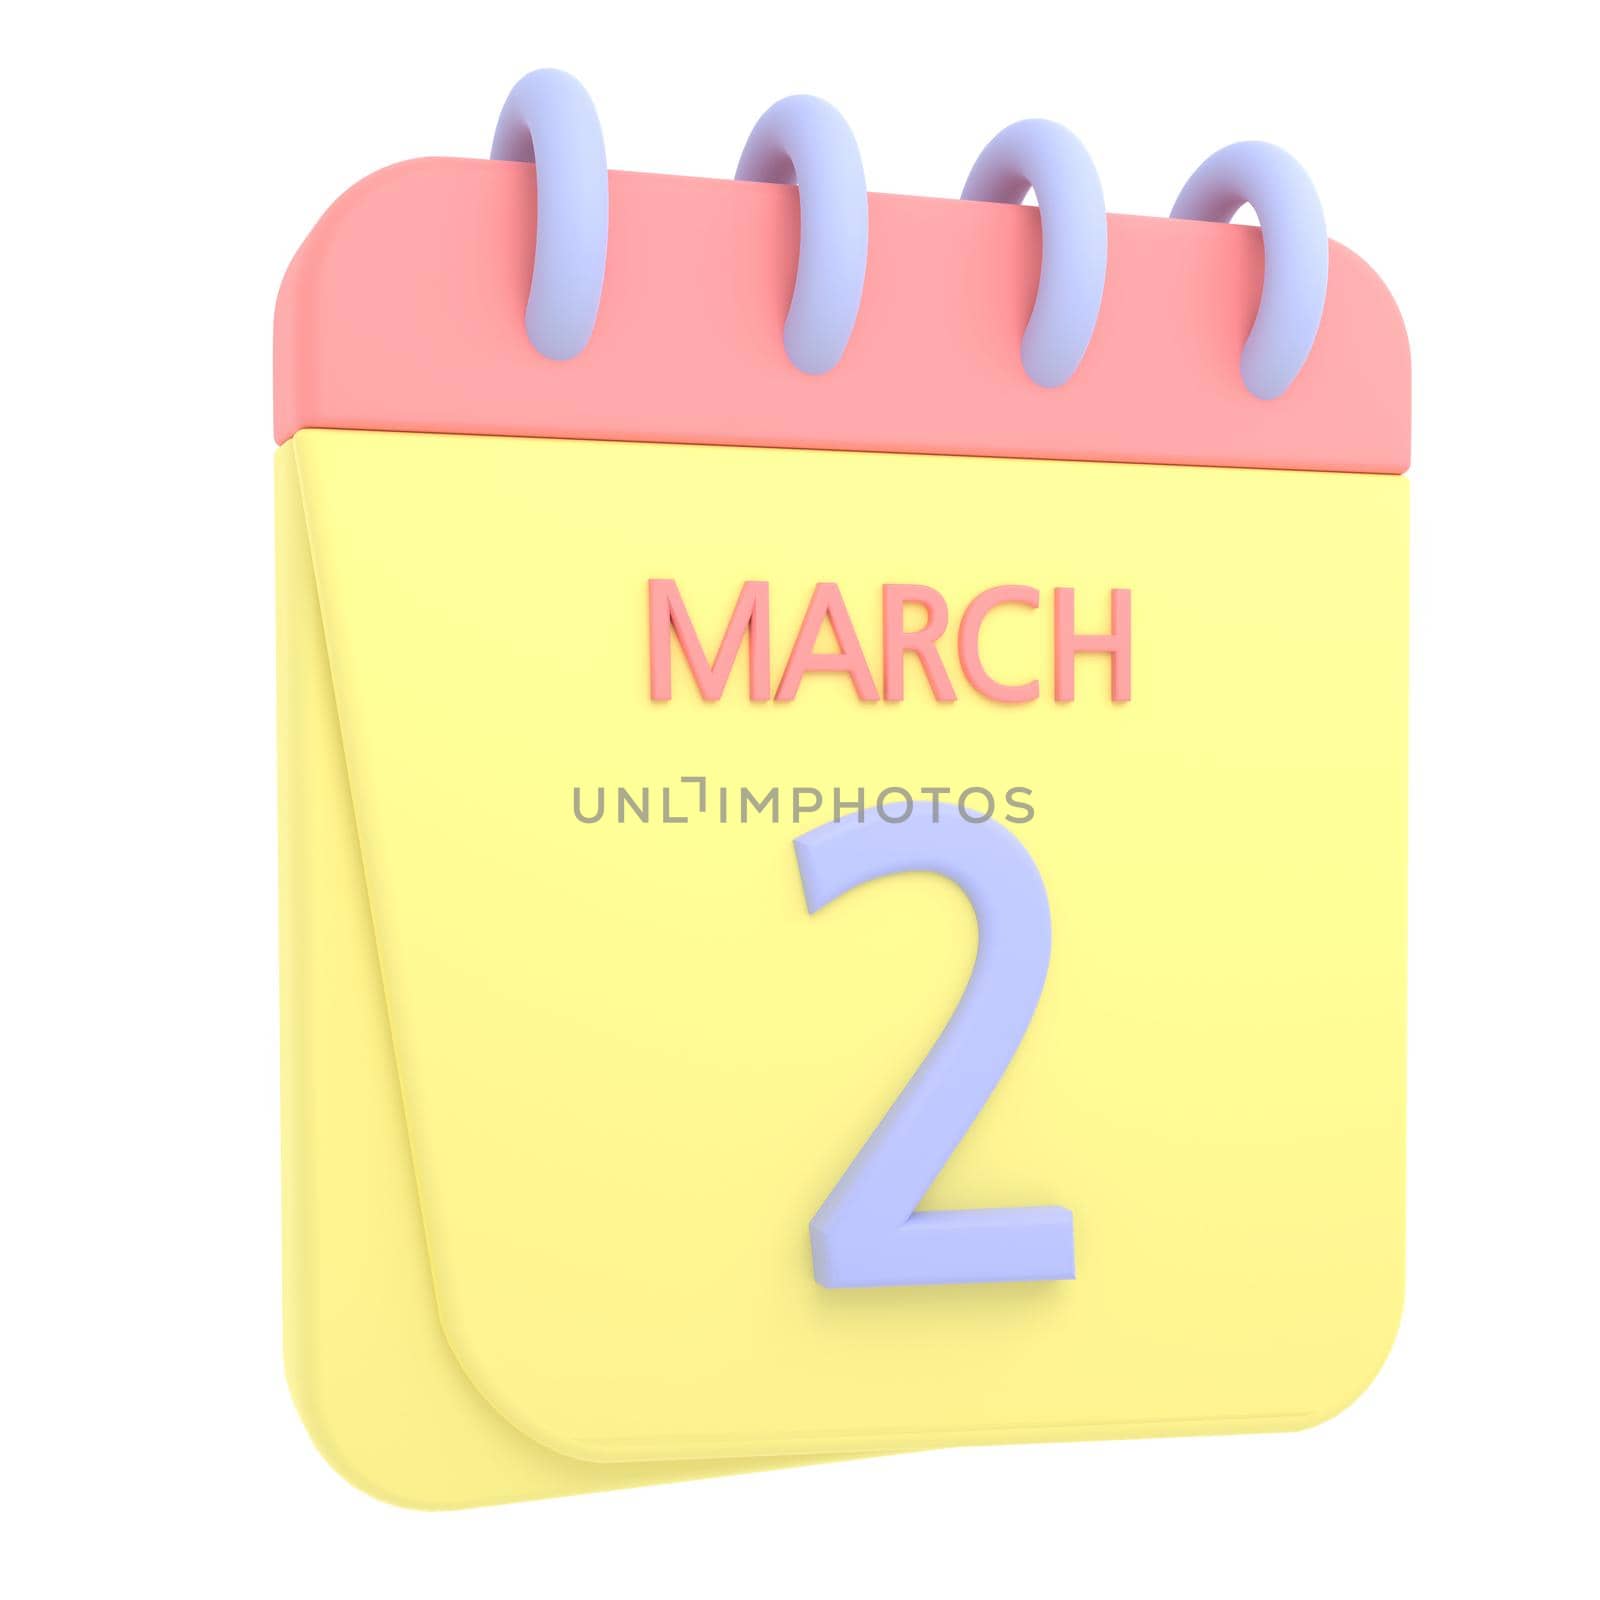 2nd March 3D calendar icon. Web style. High resolution image. White background